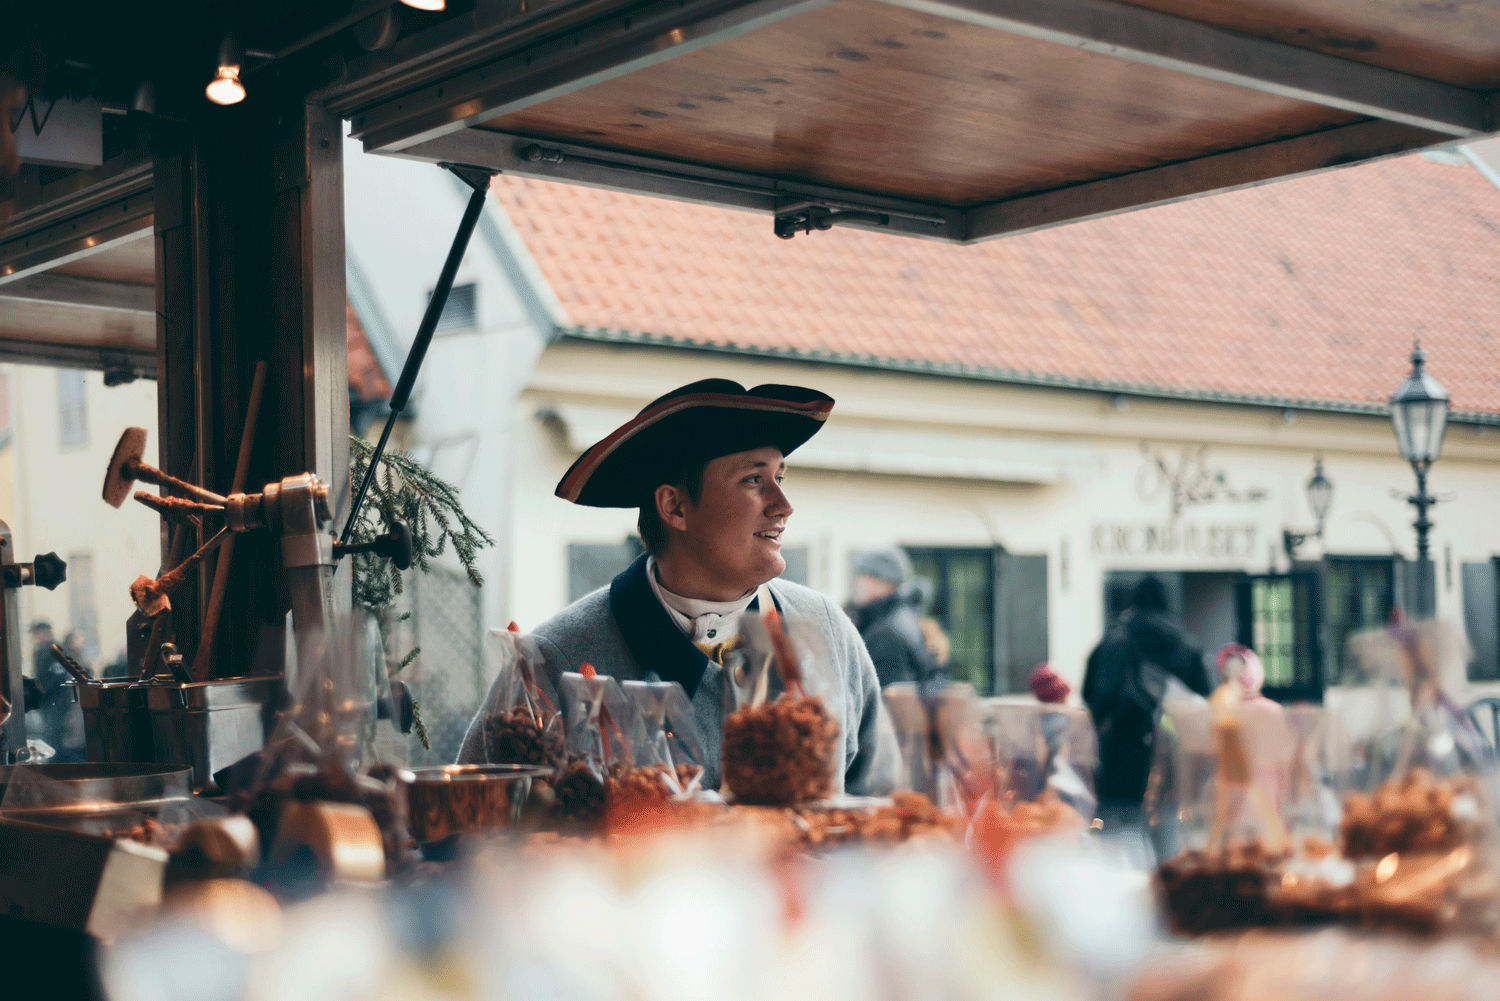 Vendor in old fashioned clothes in a candy stand.